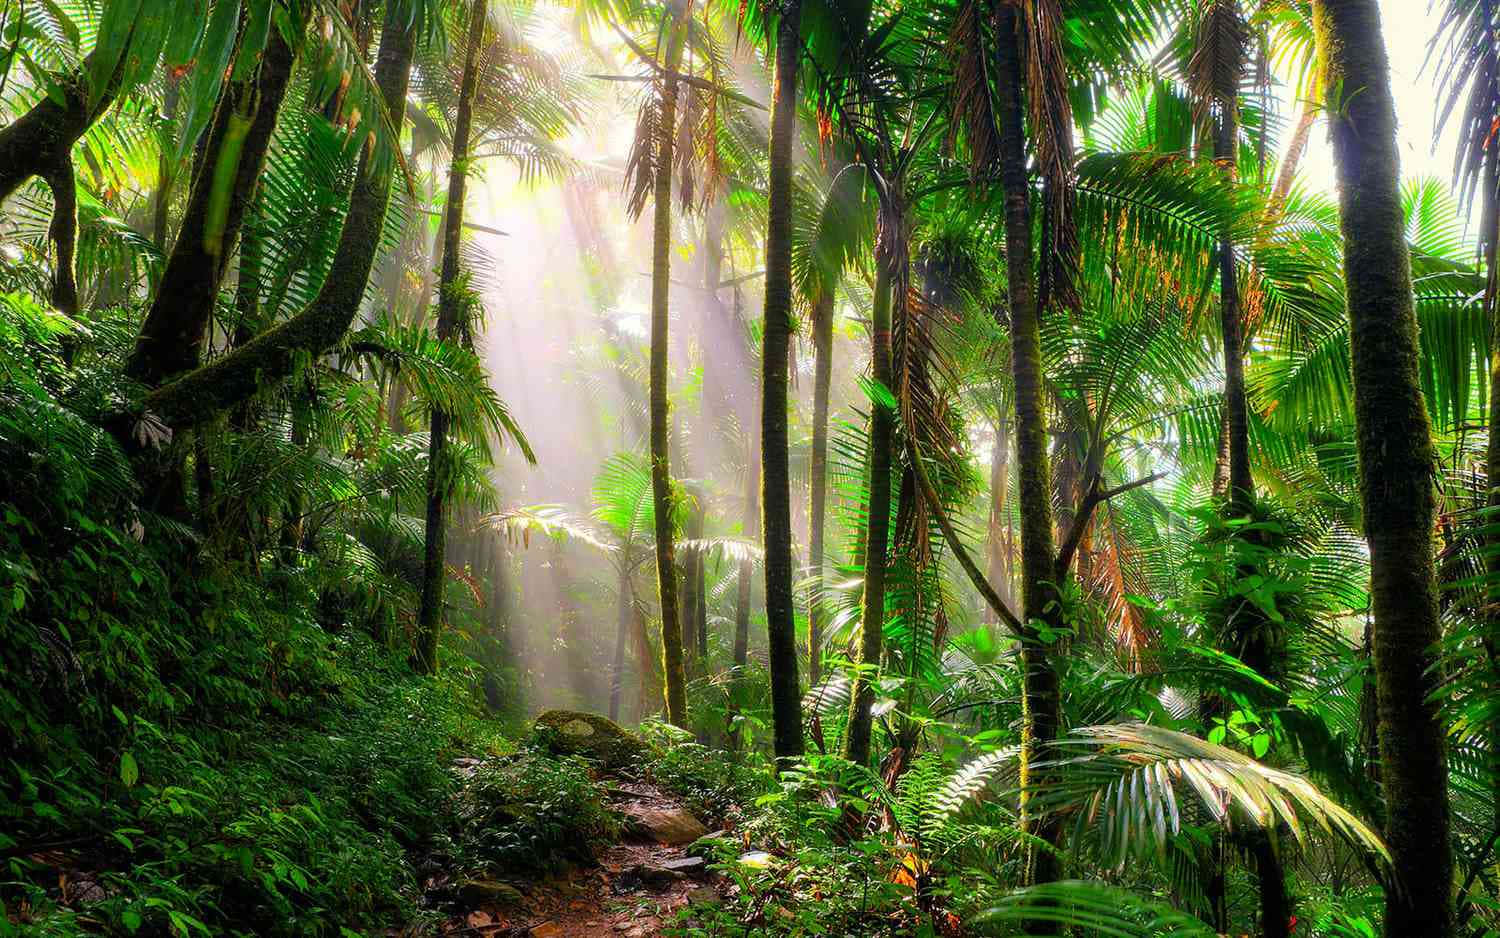 A Trail Through A Tropical Forest With Sunlight Shining Through The Trees